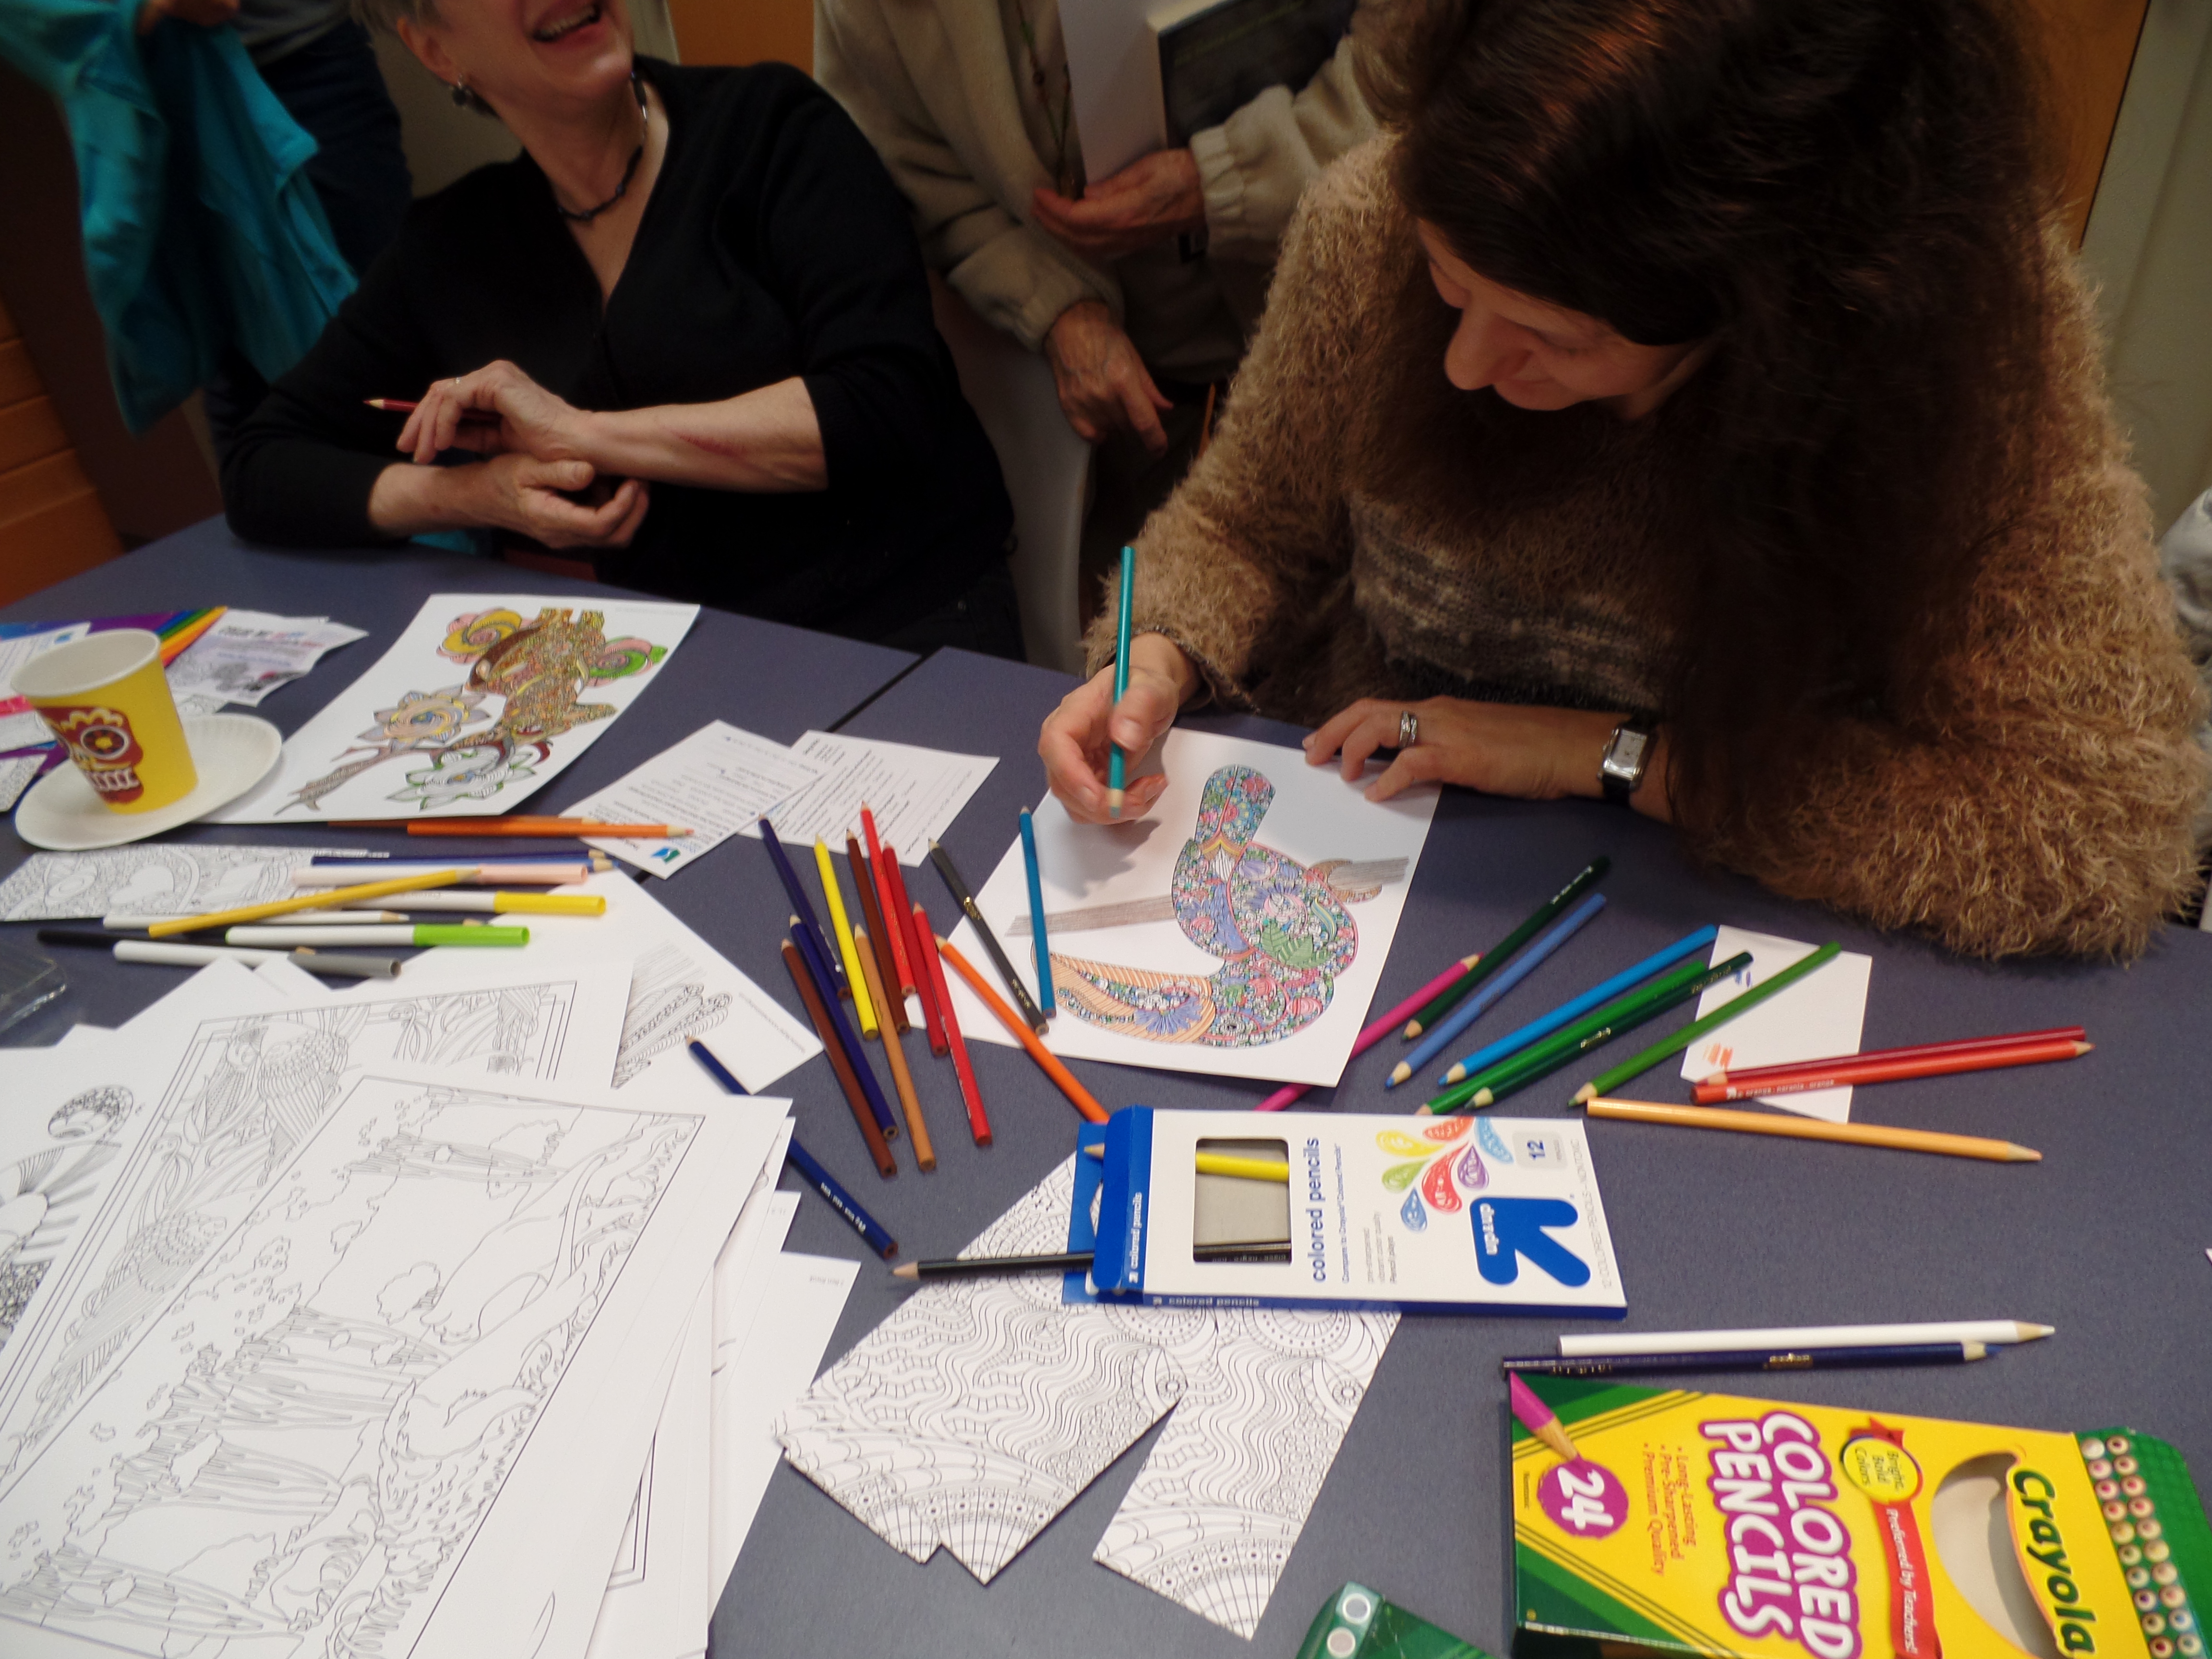 An evening of the Adult Program Coloring Session